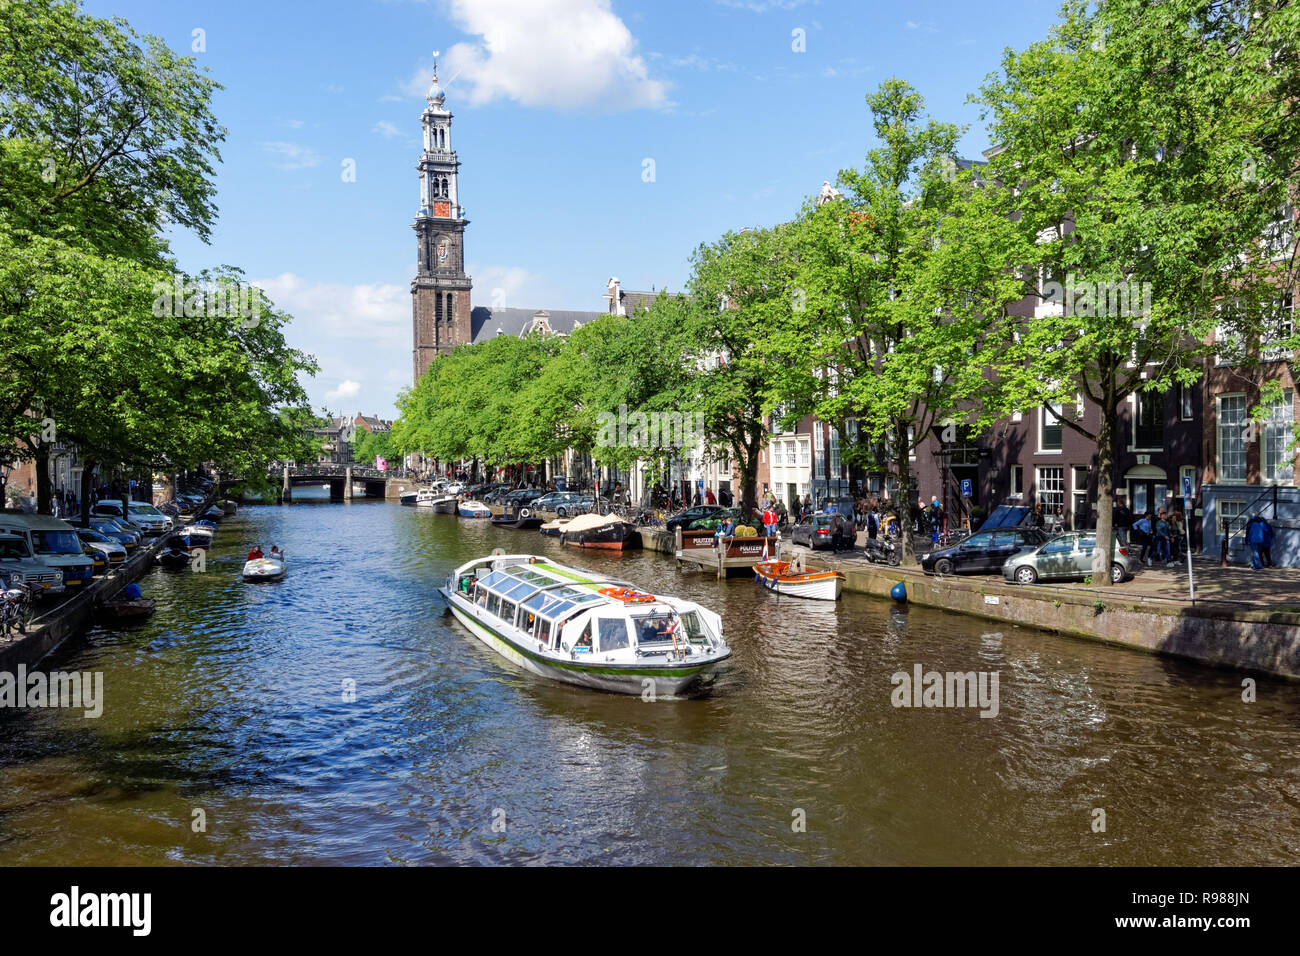 Tourist cruise boat on Prinsengracht canal in Amsterdam, Netherlands Stock Photo